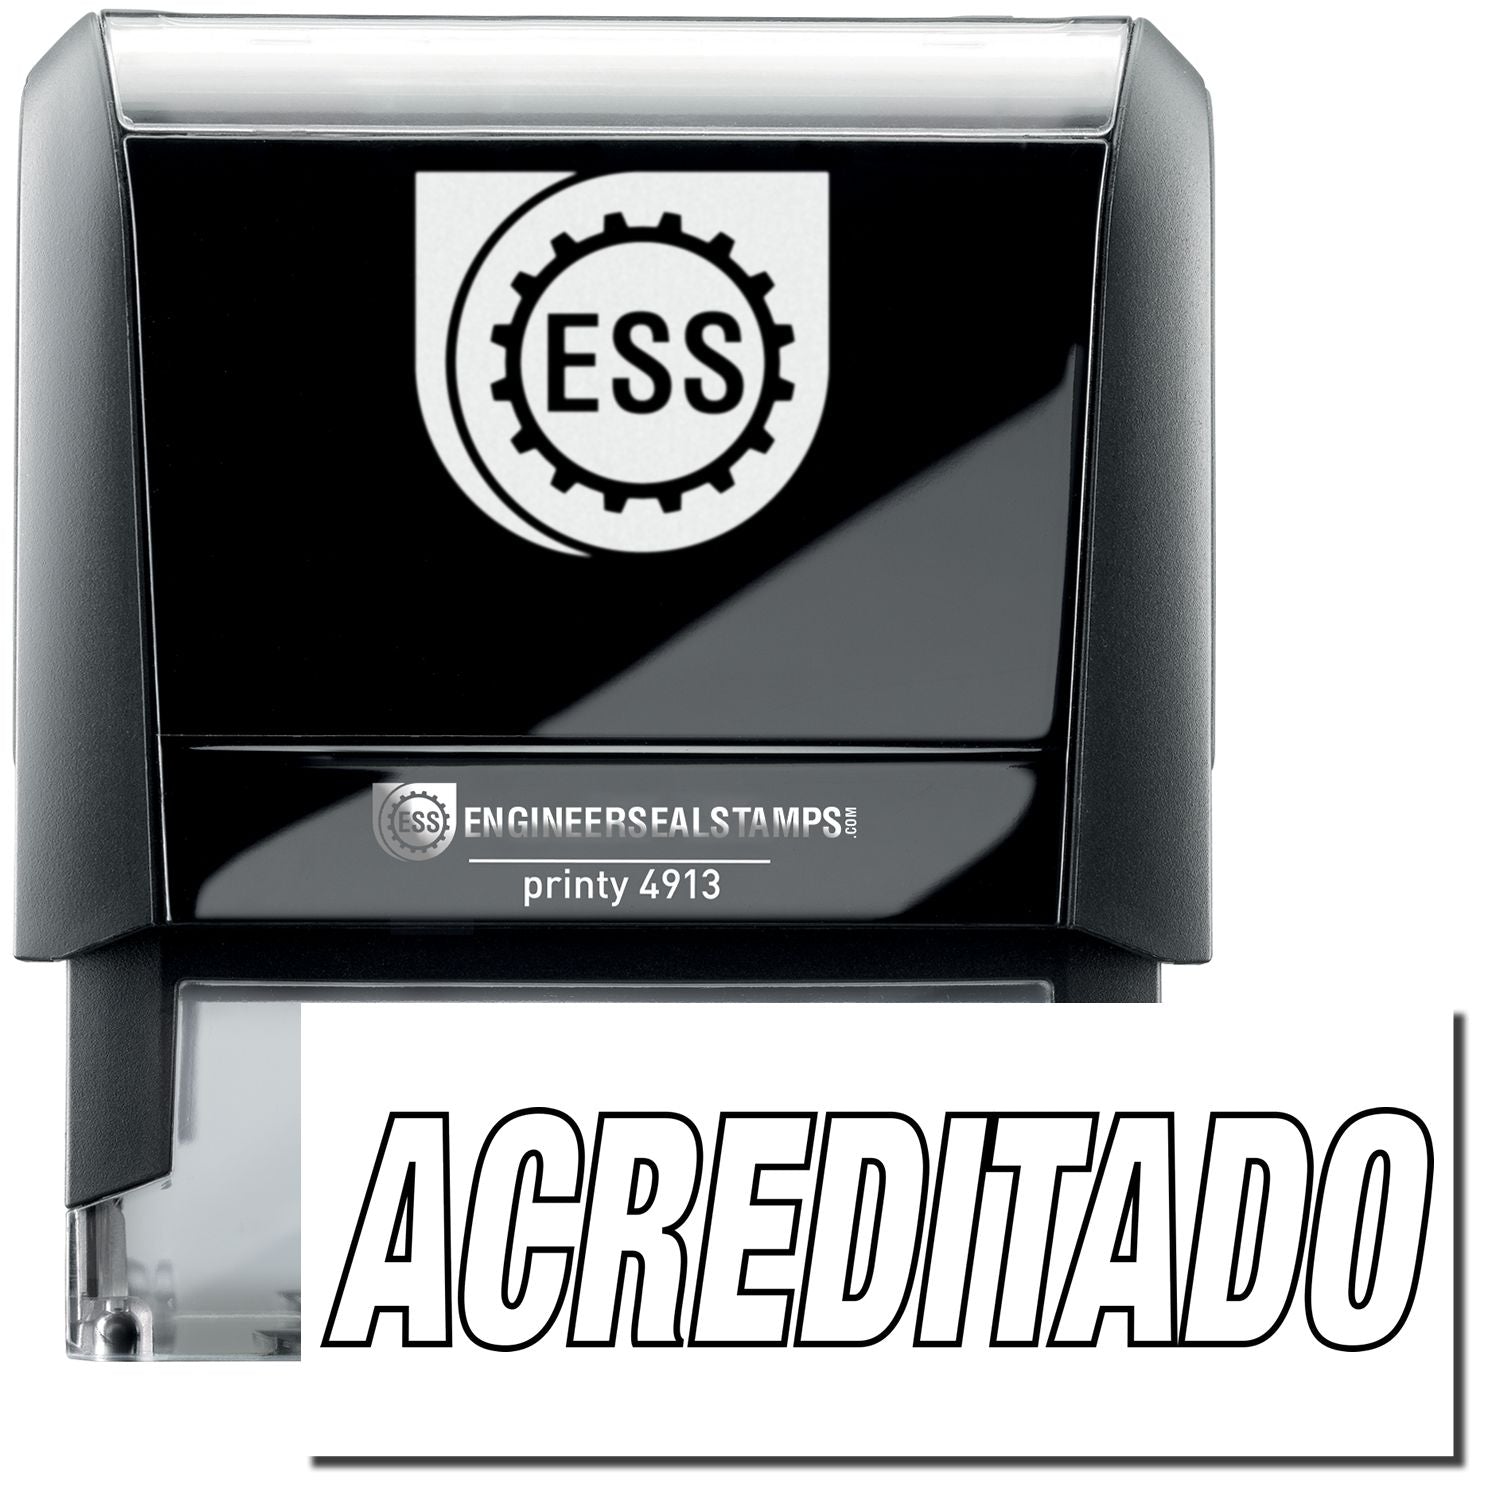 A self-inking stamp with a stamped image showing how the text "ACREDITADO" in a large outline style is displayed by it after stamping.